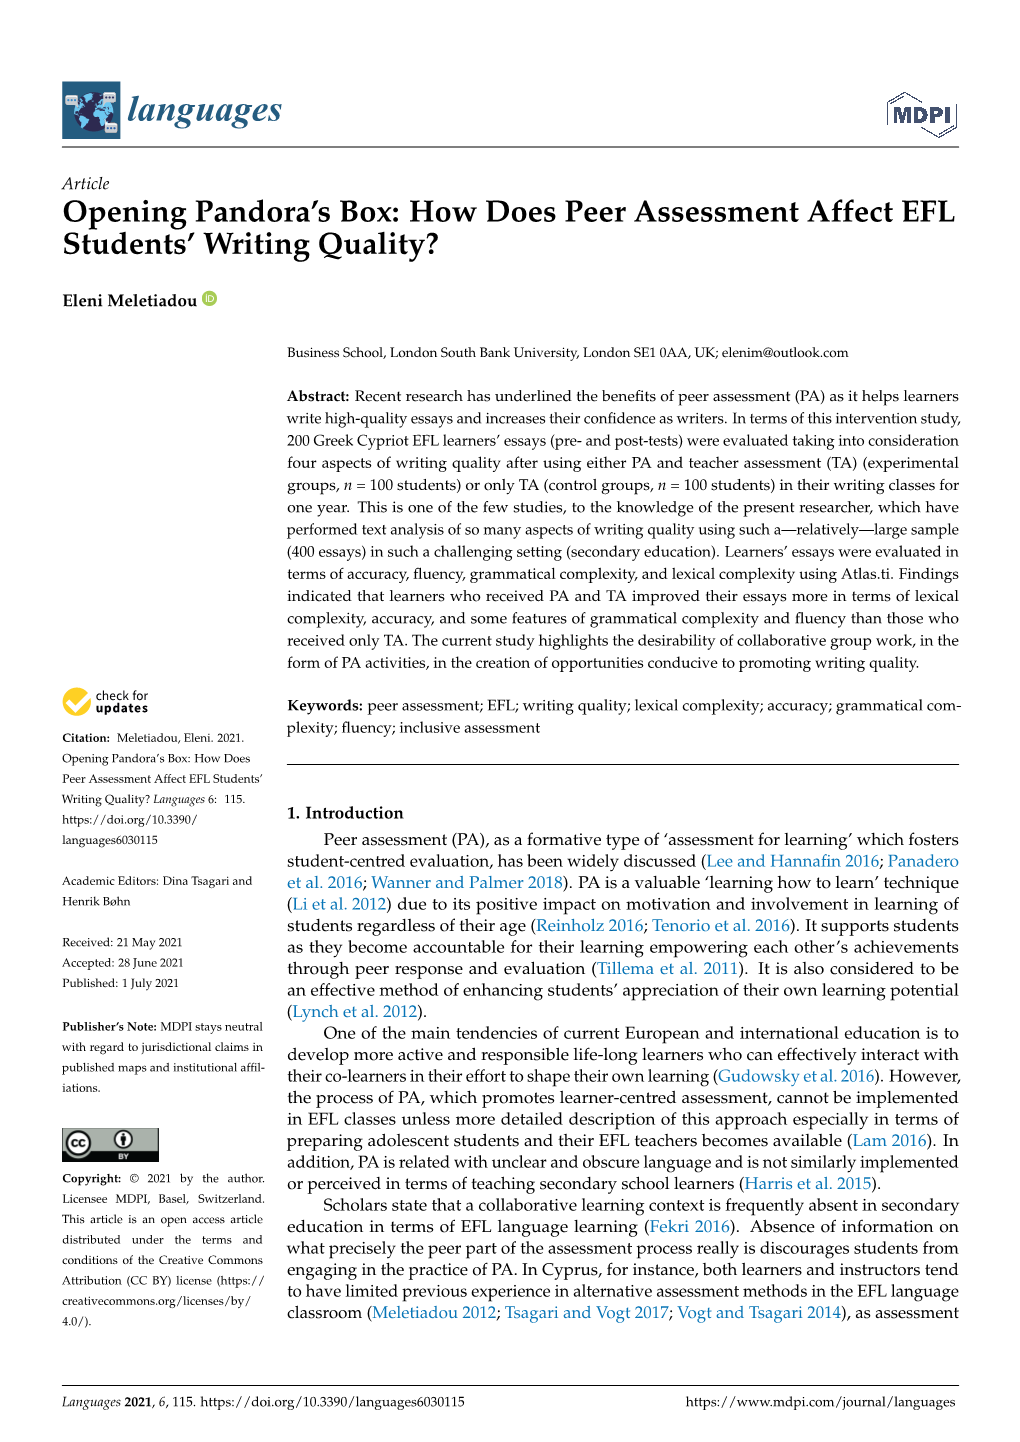 How Does Peer Assessment Affect EFL Students' Writing Quality?